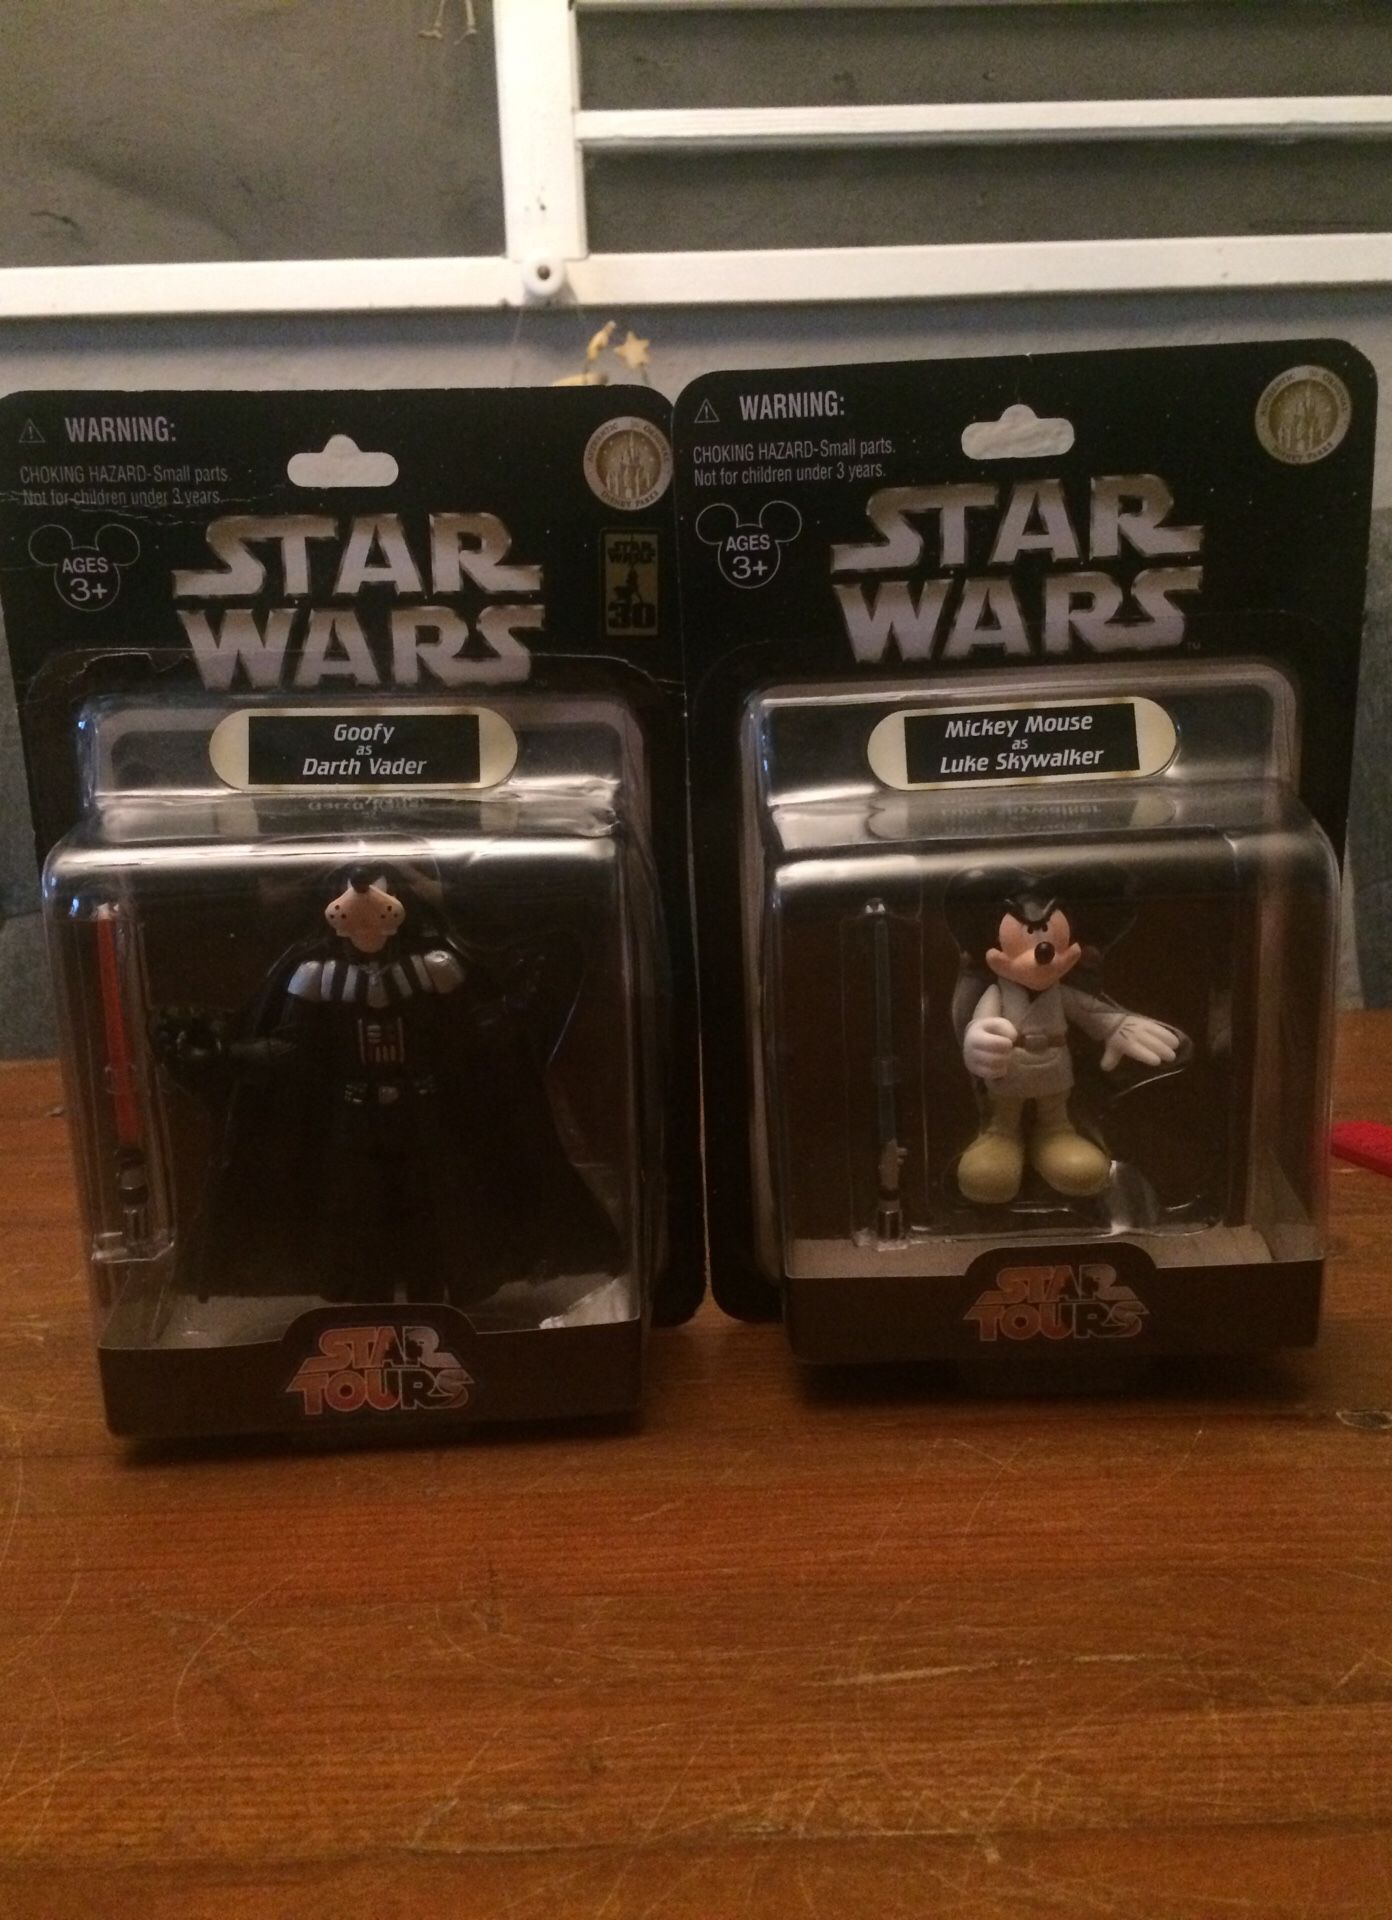 Star Wars Star Tours Disney Mickey Mouse as Luke Skywalker and Goofy as Darth Vader action figure lot